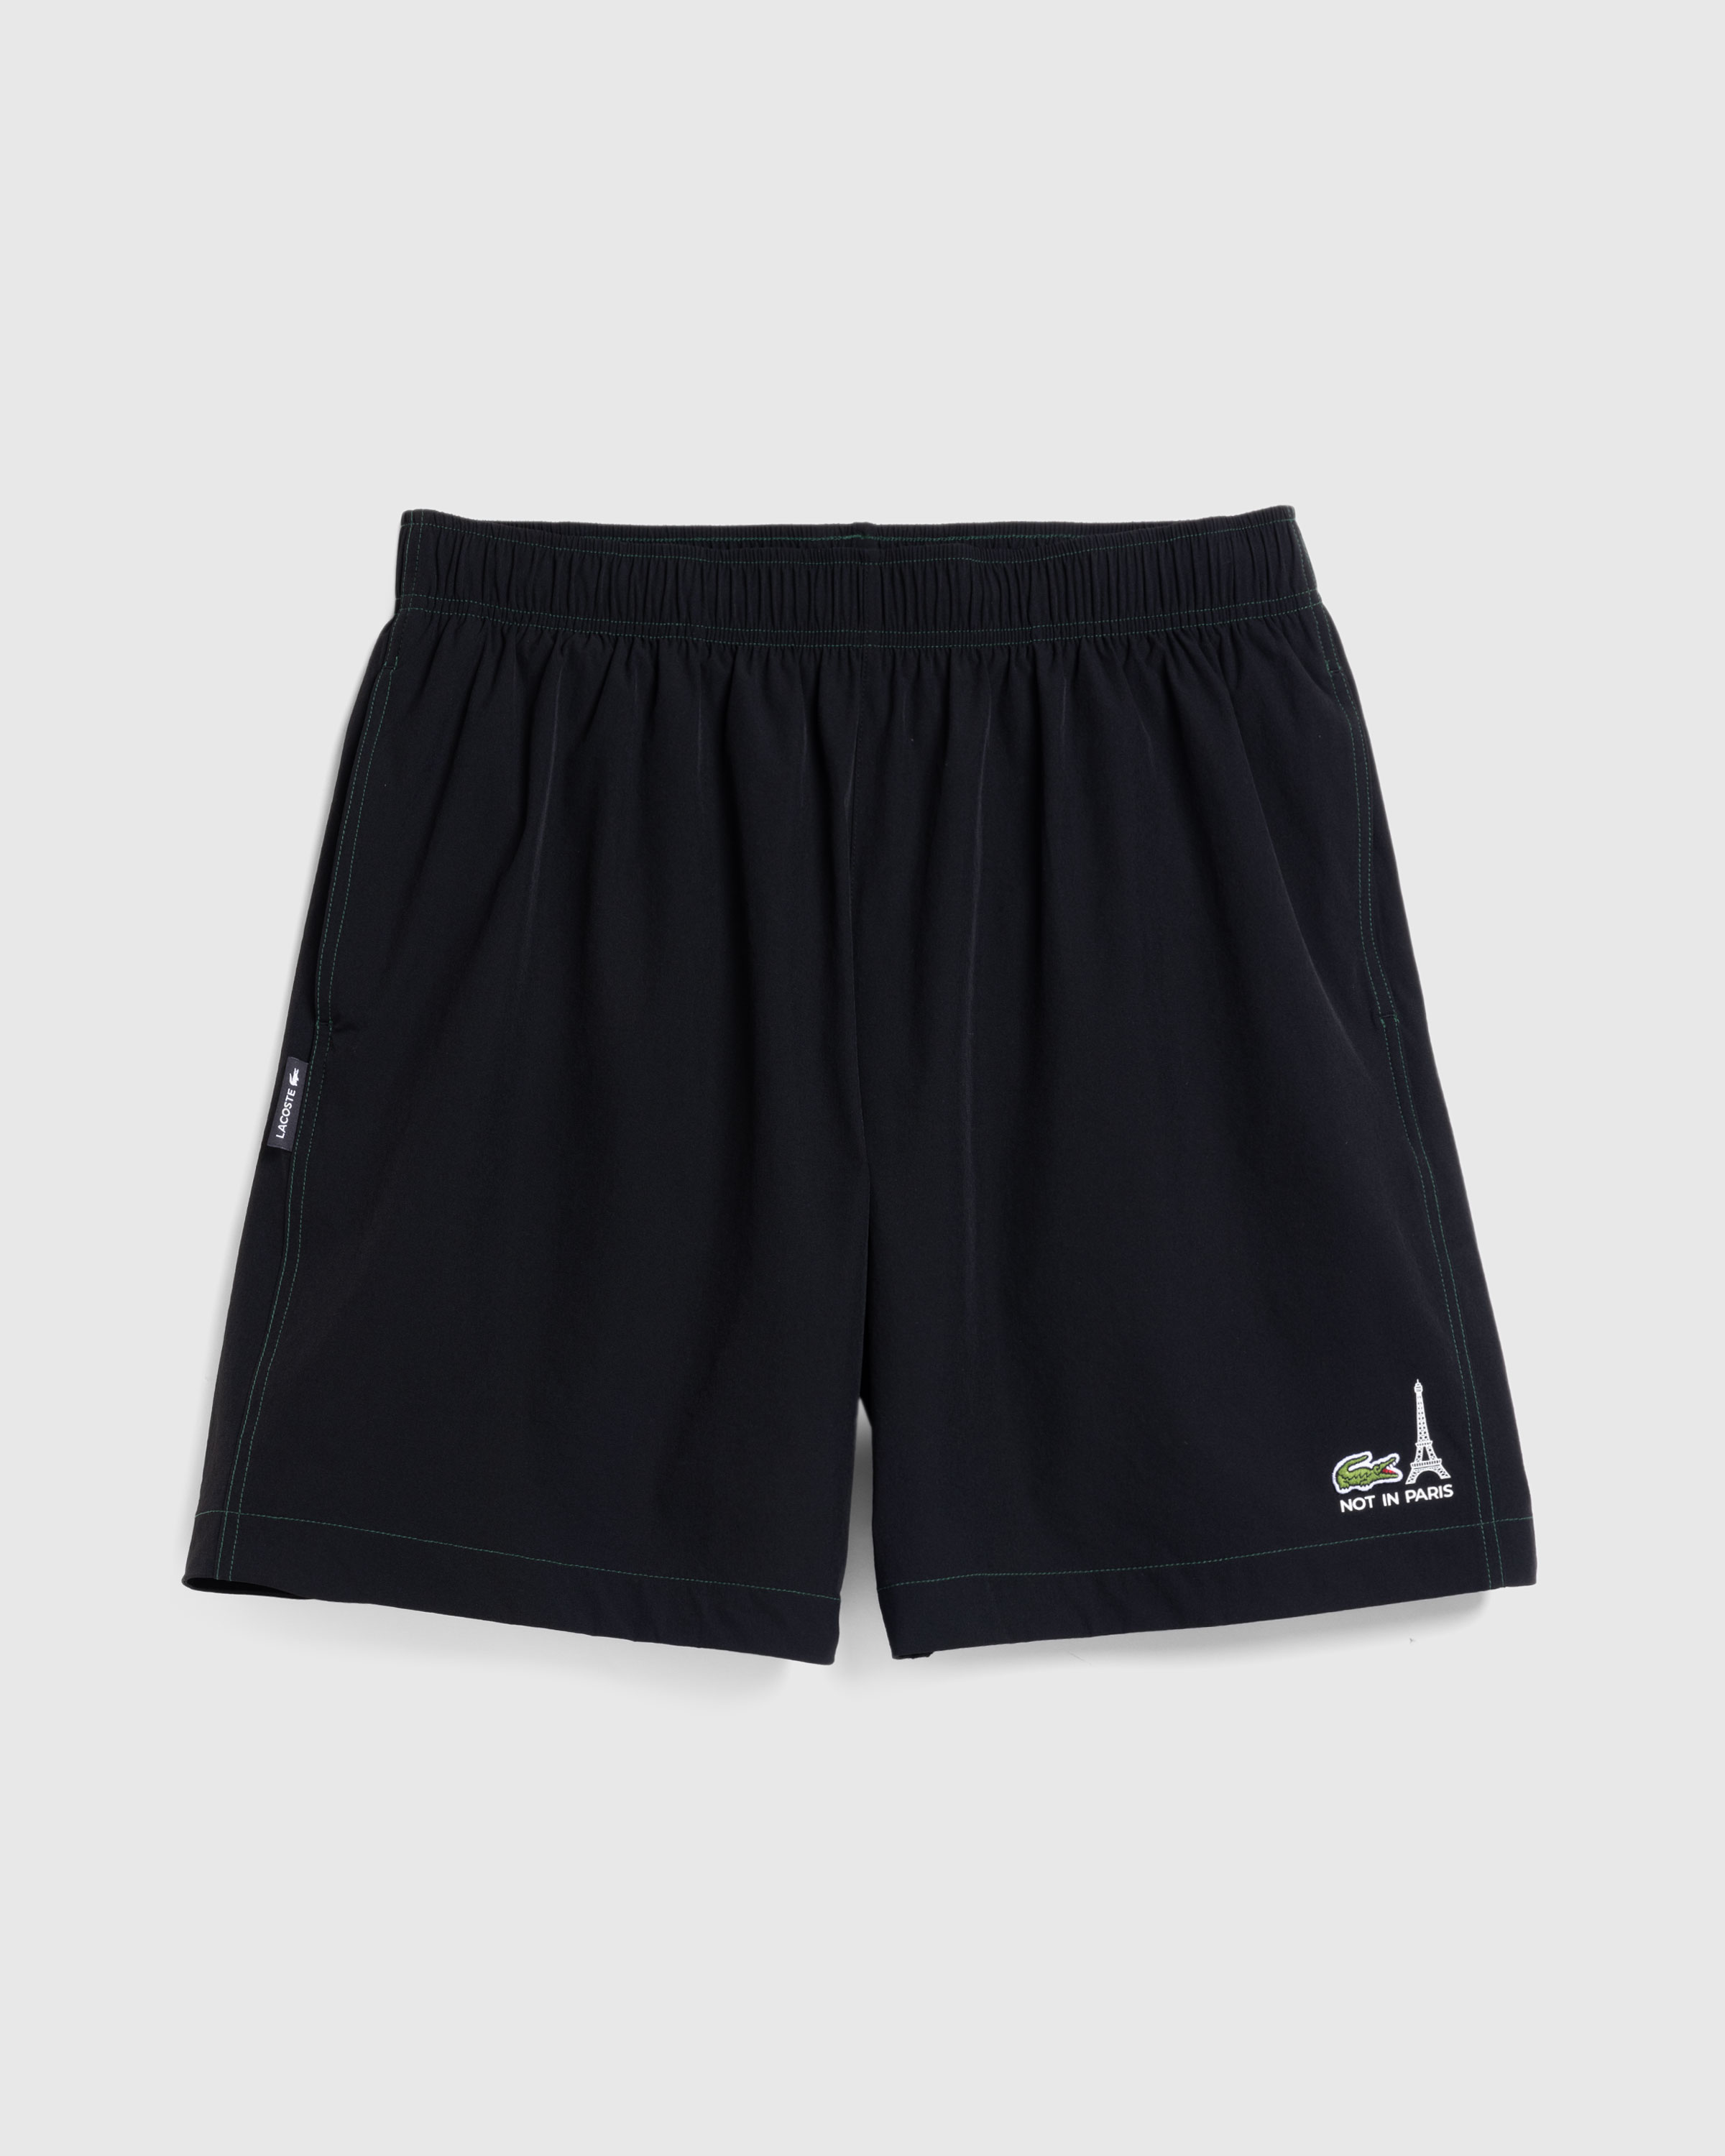 Lacoste x Highsnobiety – Not In Paris Tennis Shorts Black - Active Shorts - Sinople - Image 1